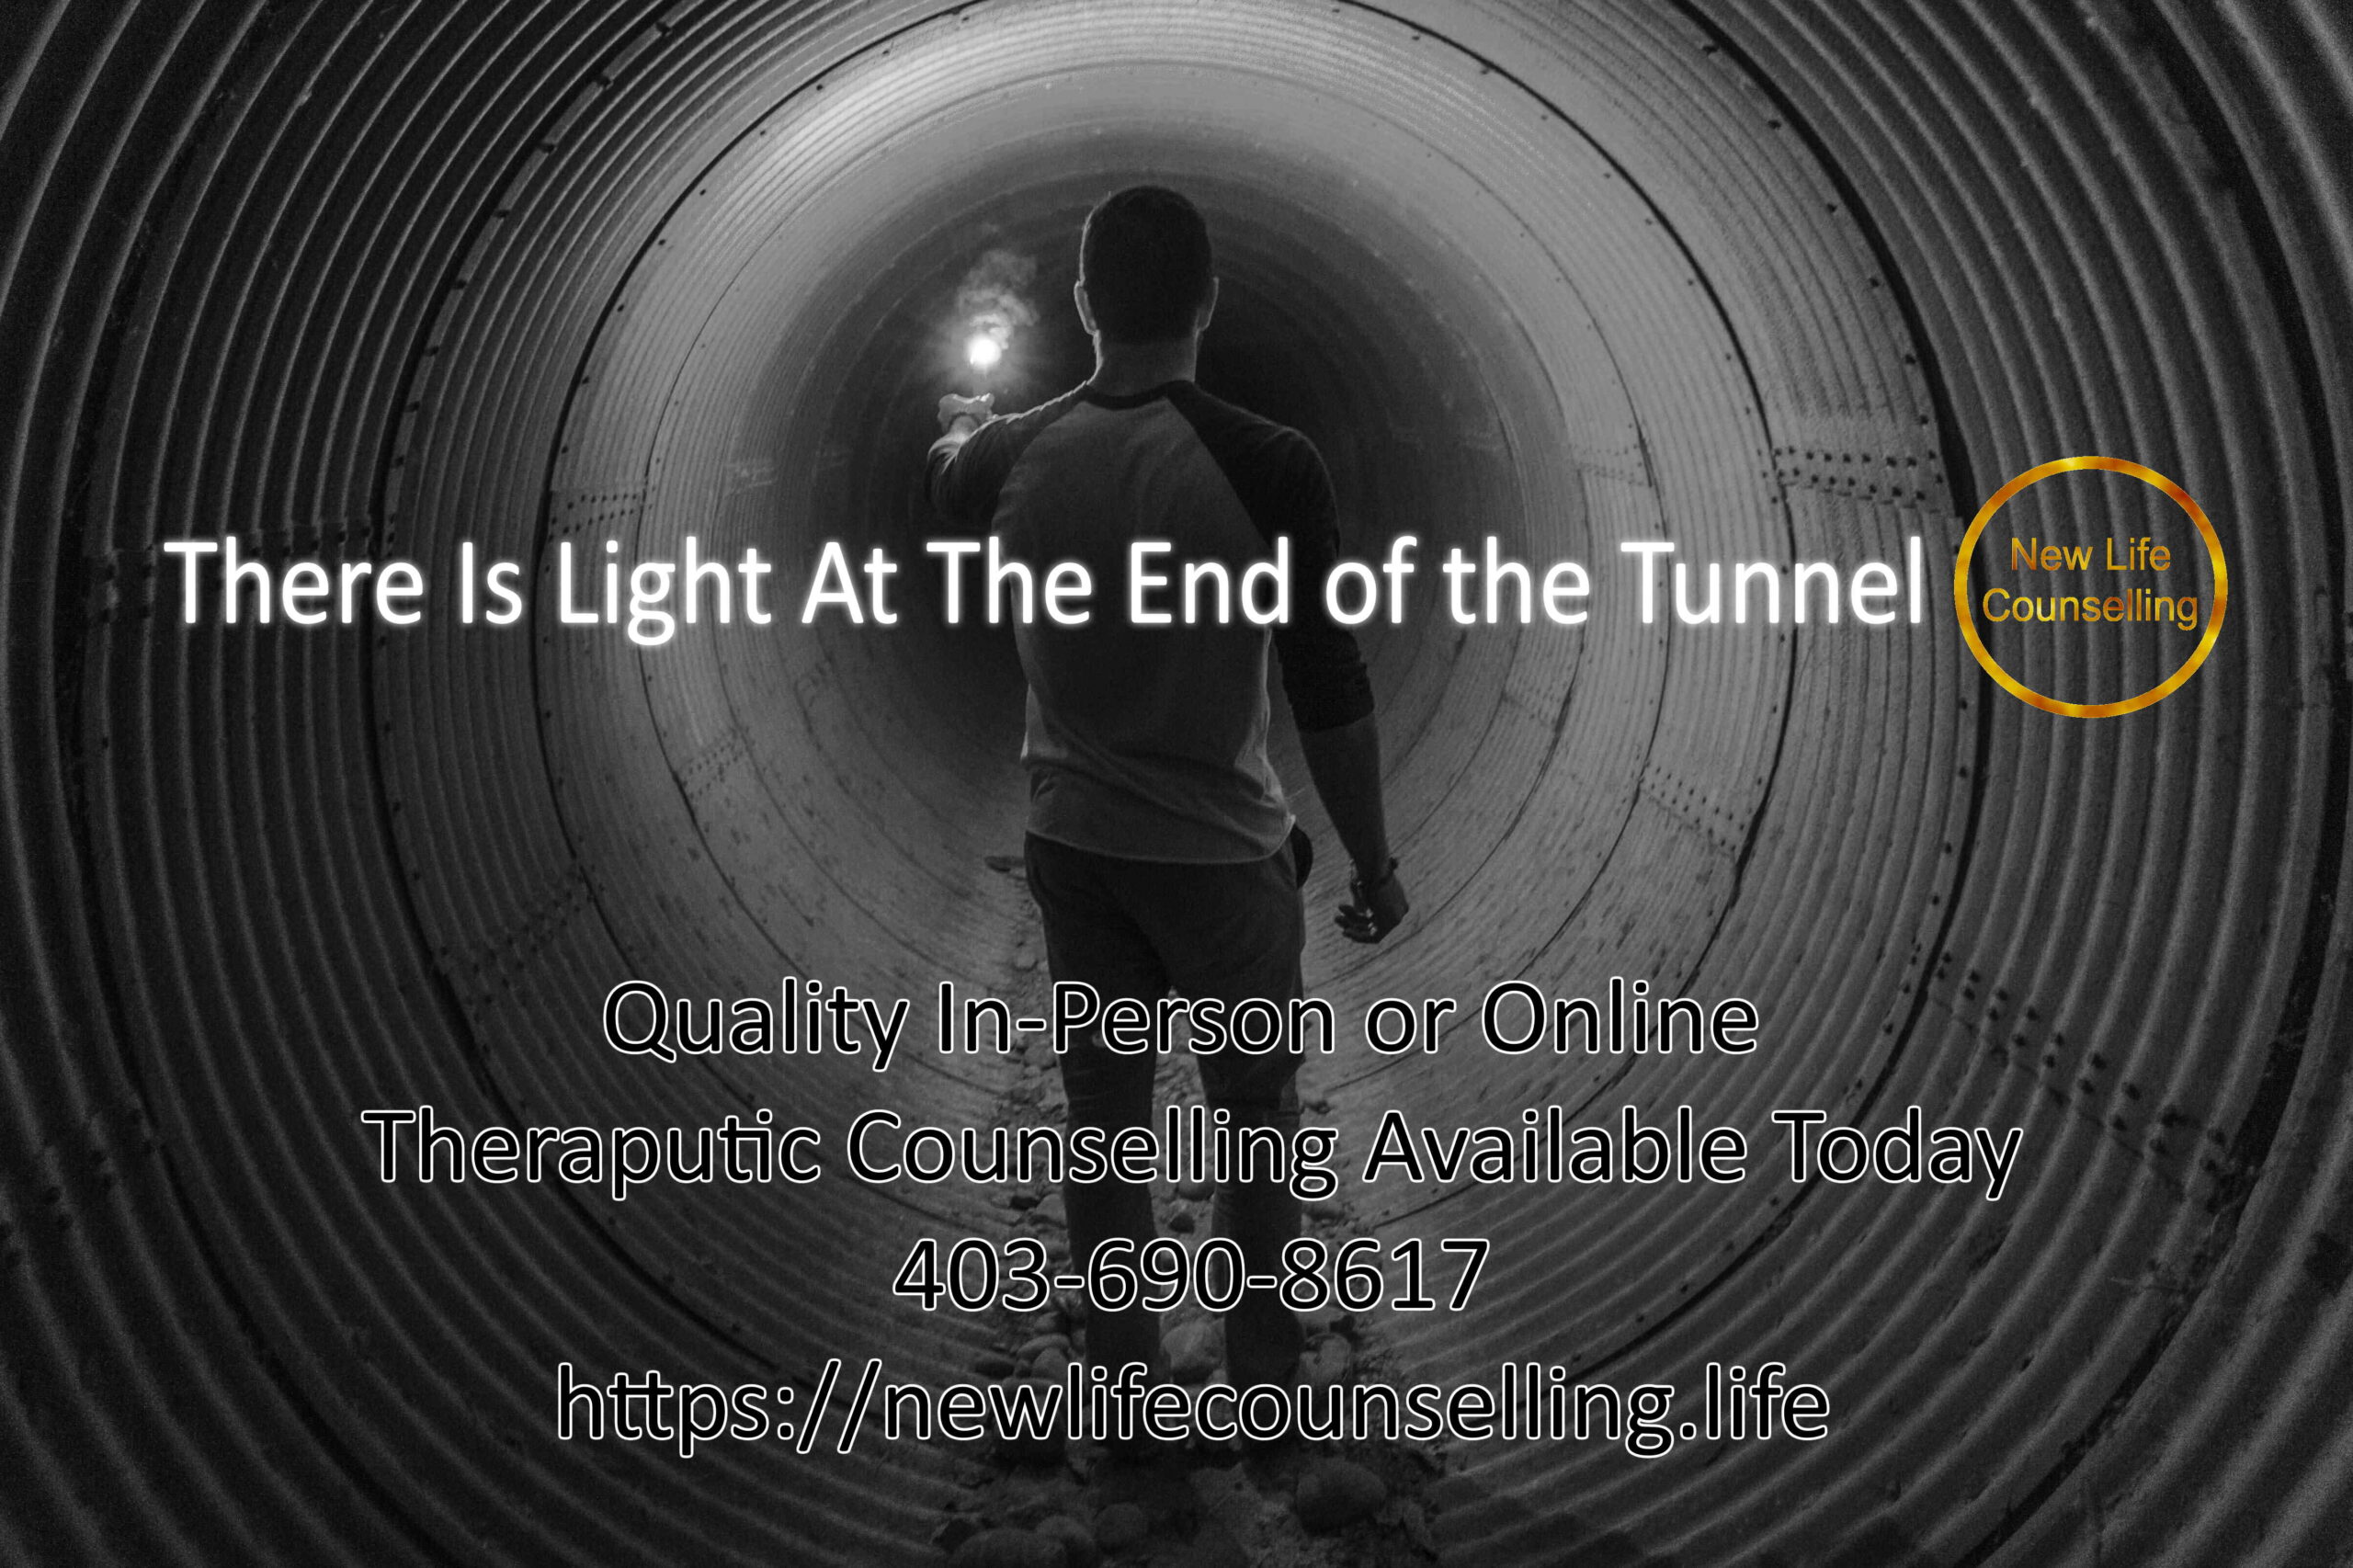 You are currently viewing There Is Light At The End of the Tunnel